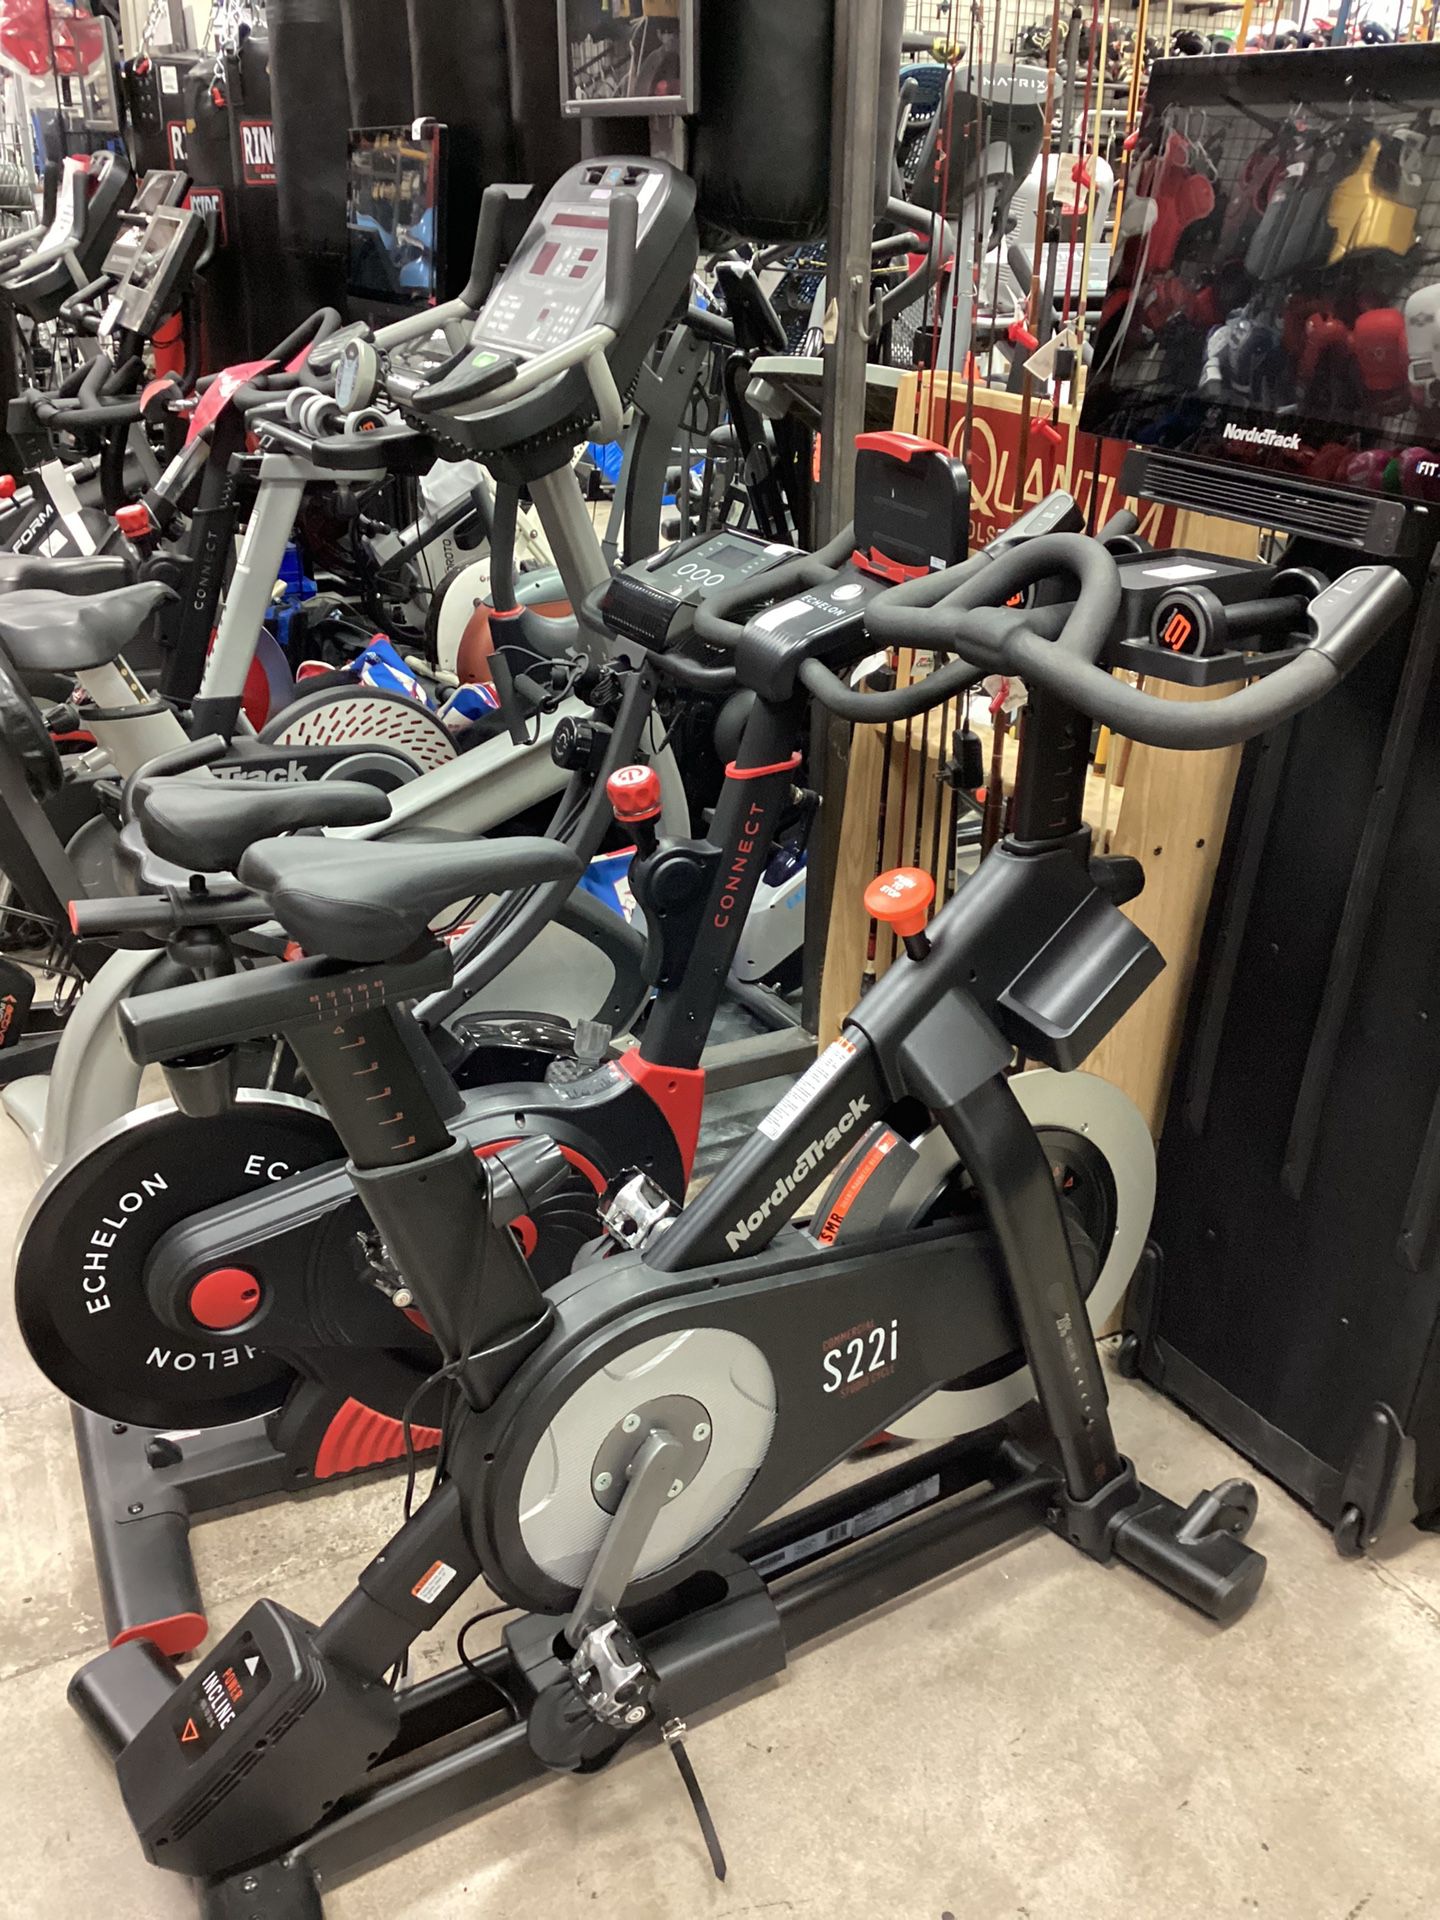 New And Used Stationary Exercise Bikes (Upright, Spin, Recumbent) Prices Vary 